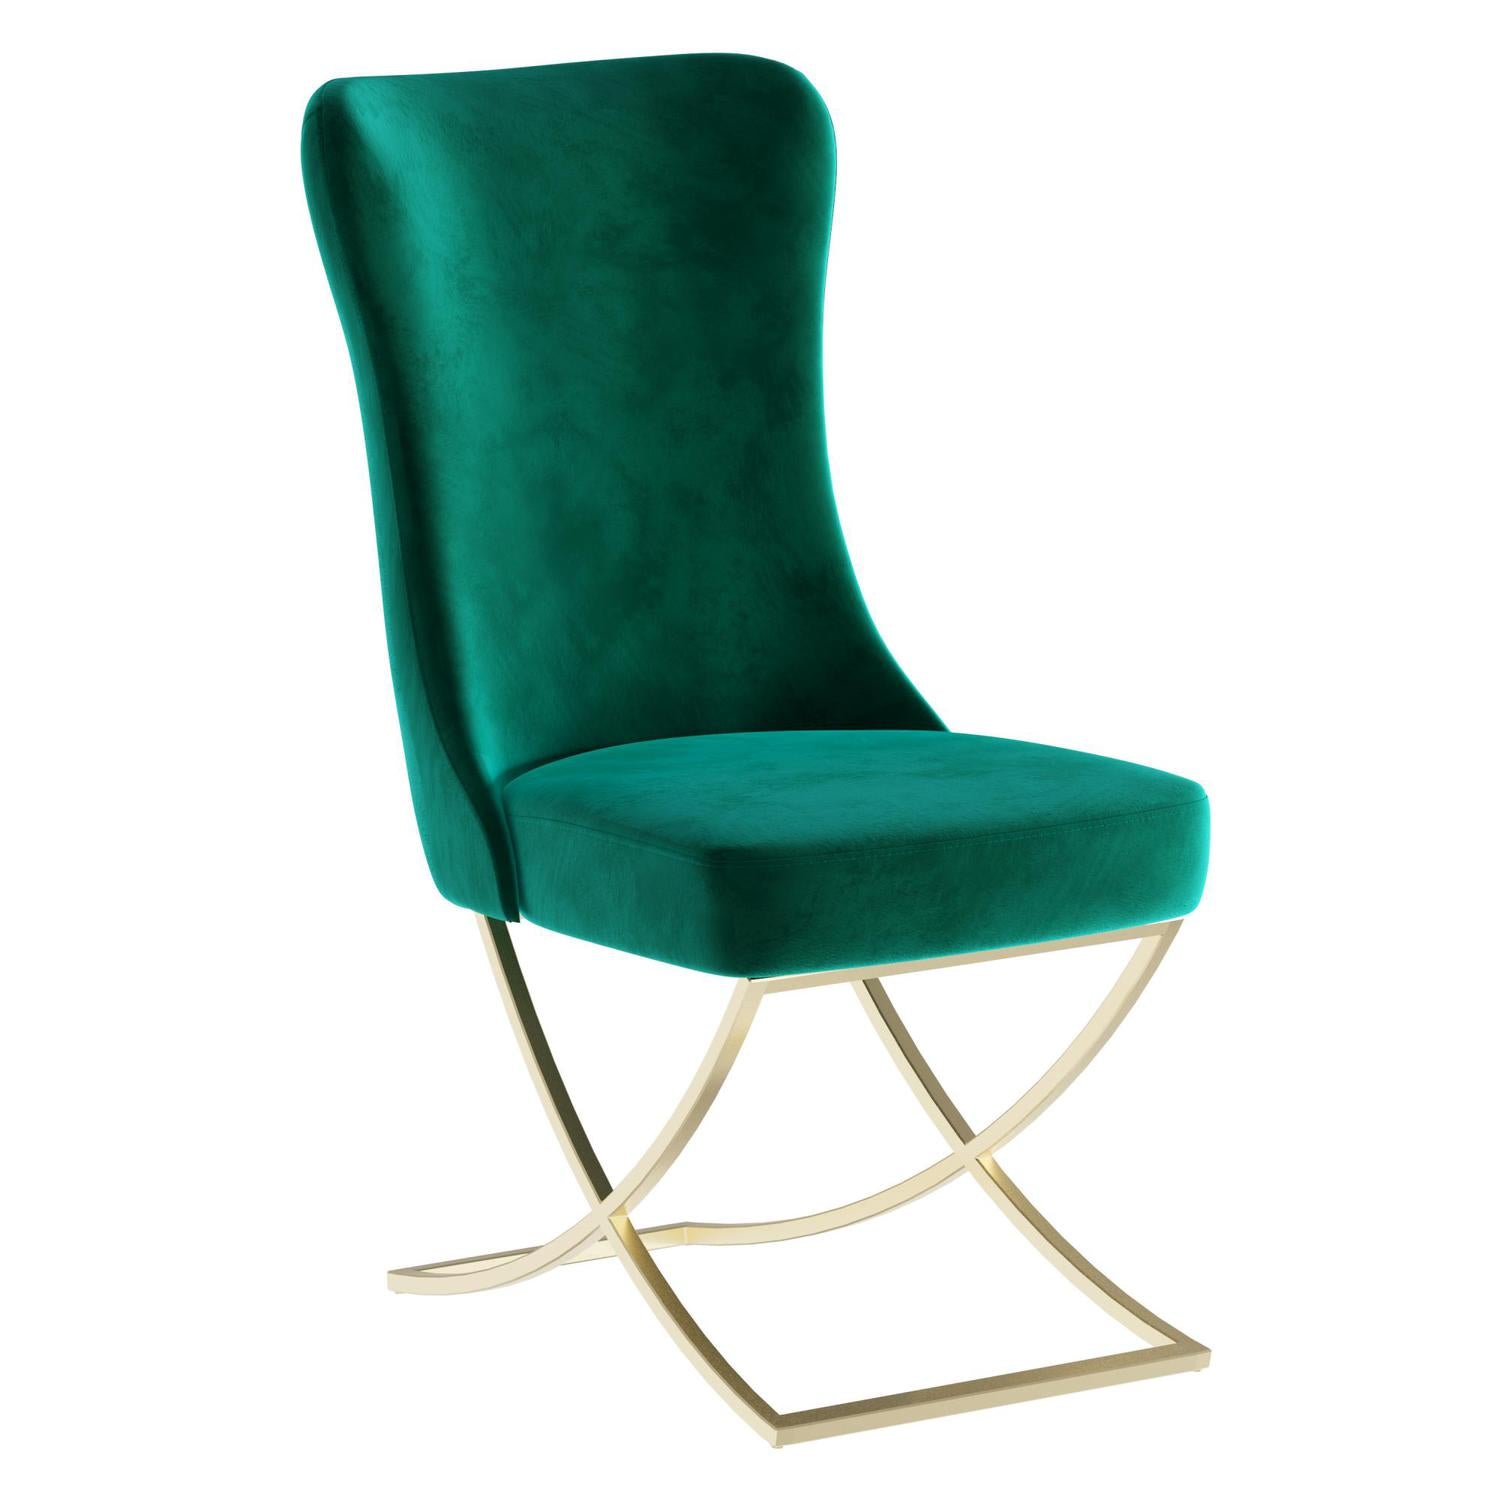 Sultan Collection Wing Back, Modern design, upholstered dining chair in Emerald Green with Gold Metal legs in white background the front view.